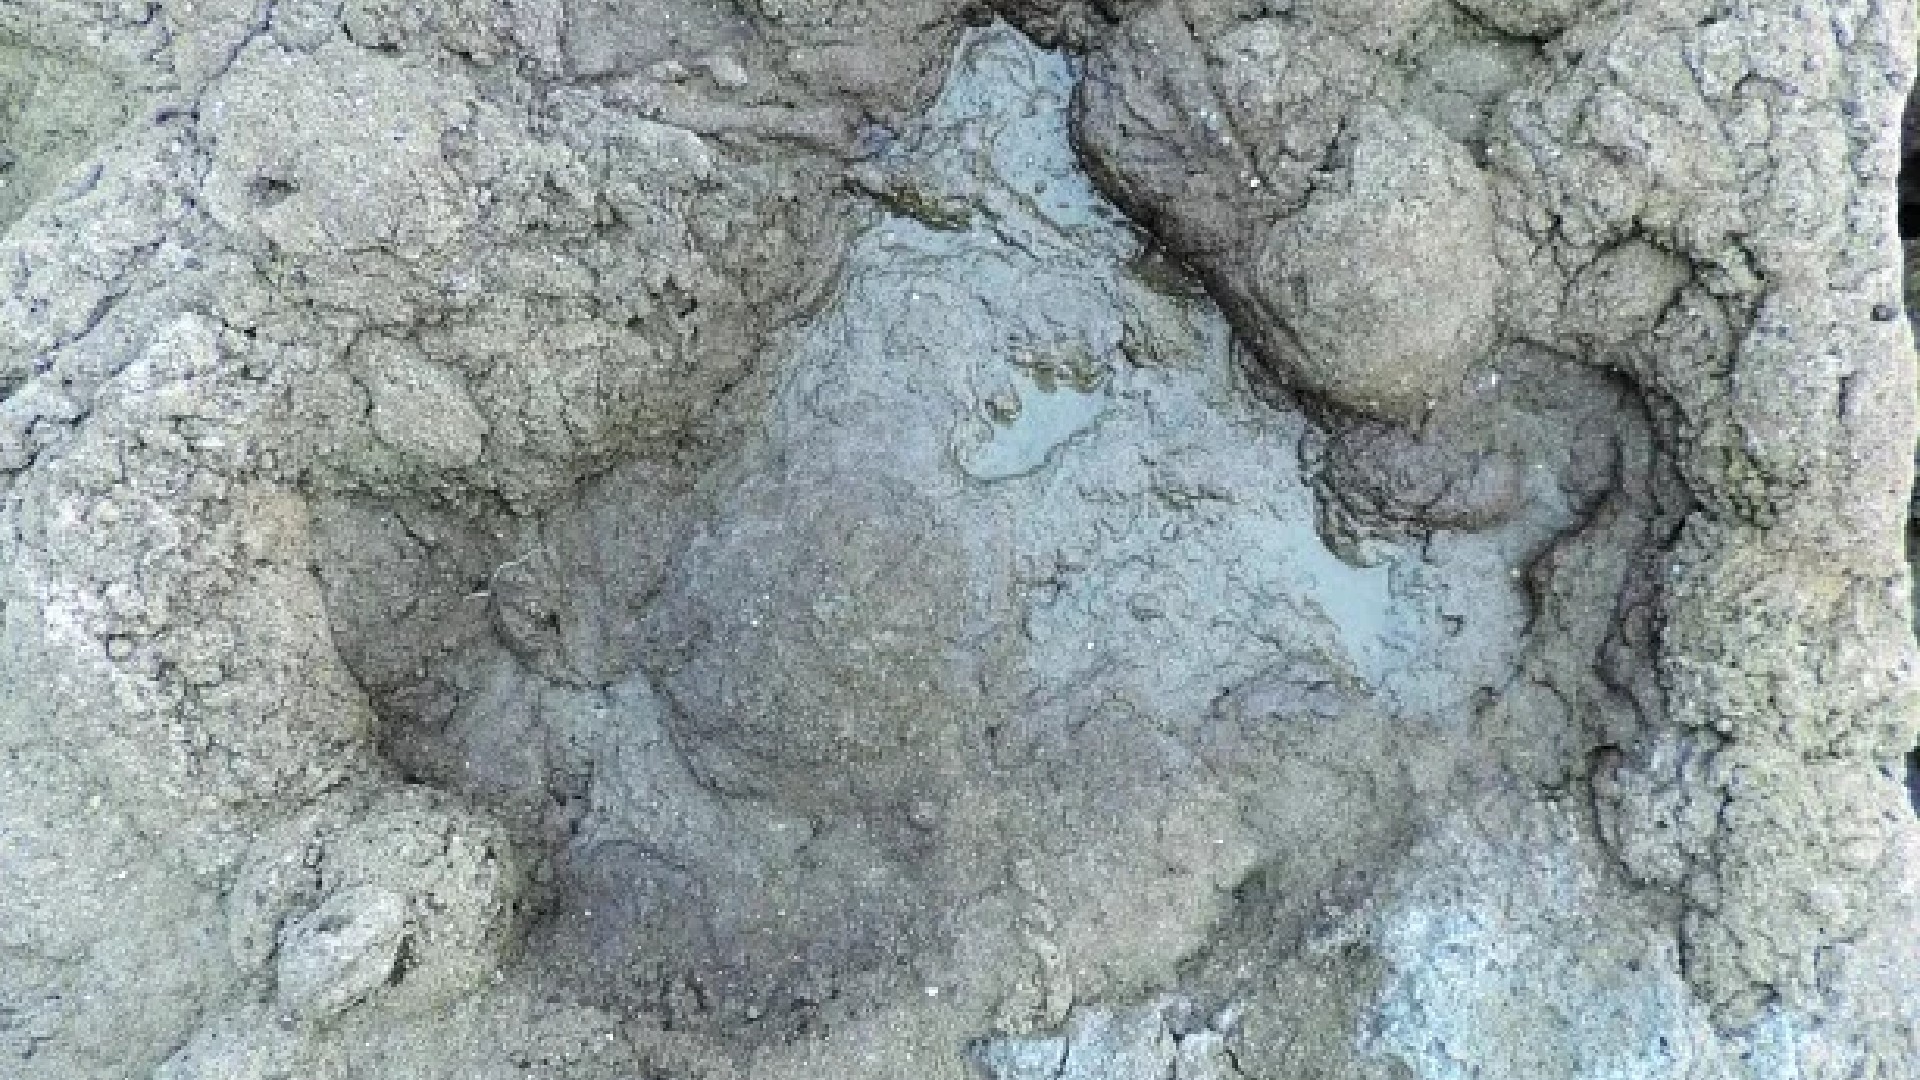 Footprints From Dinosaurs That Walked 110 Million Years Ago Found In The Uk.